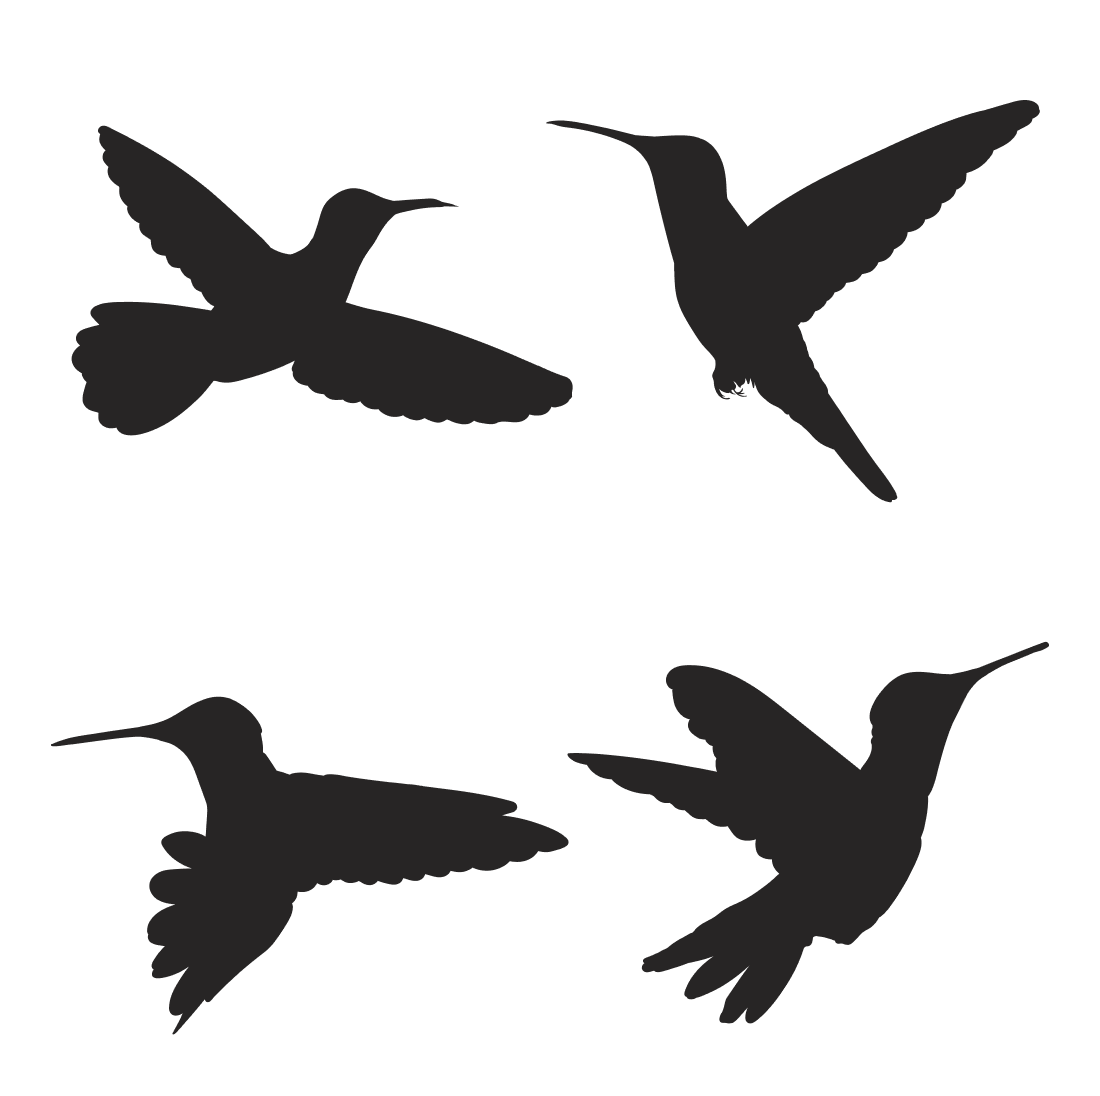 Group of birds flying in the air.